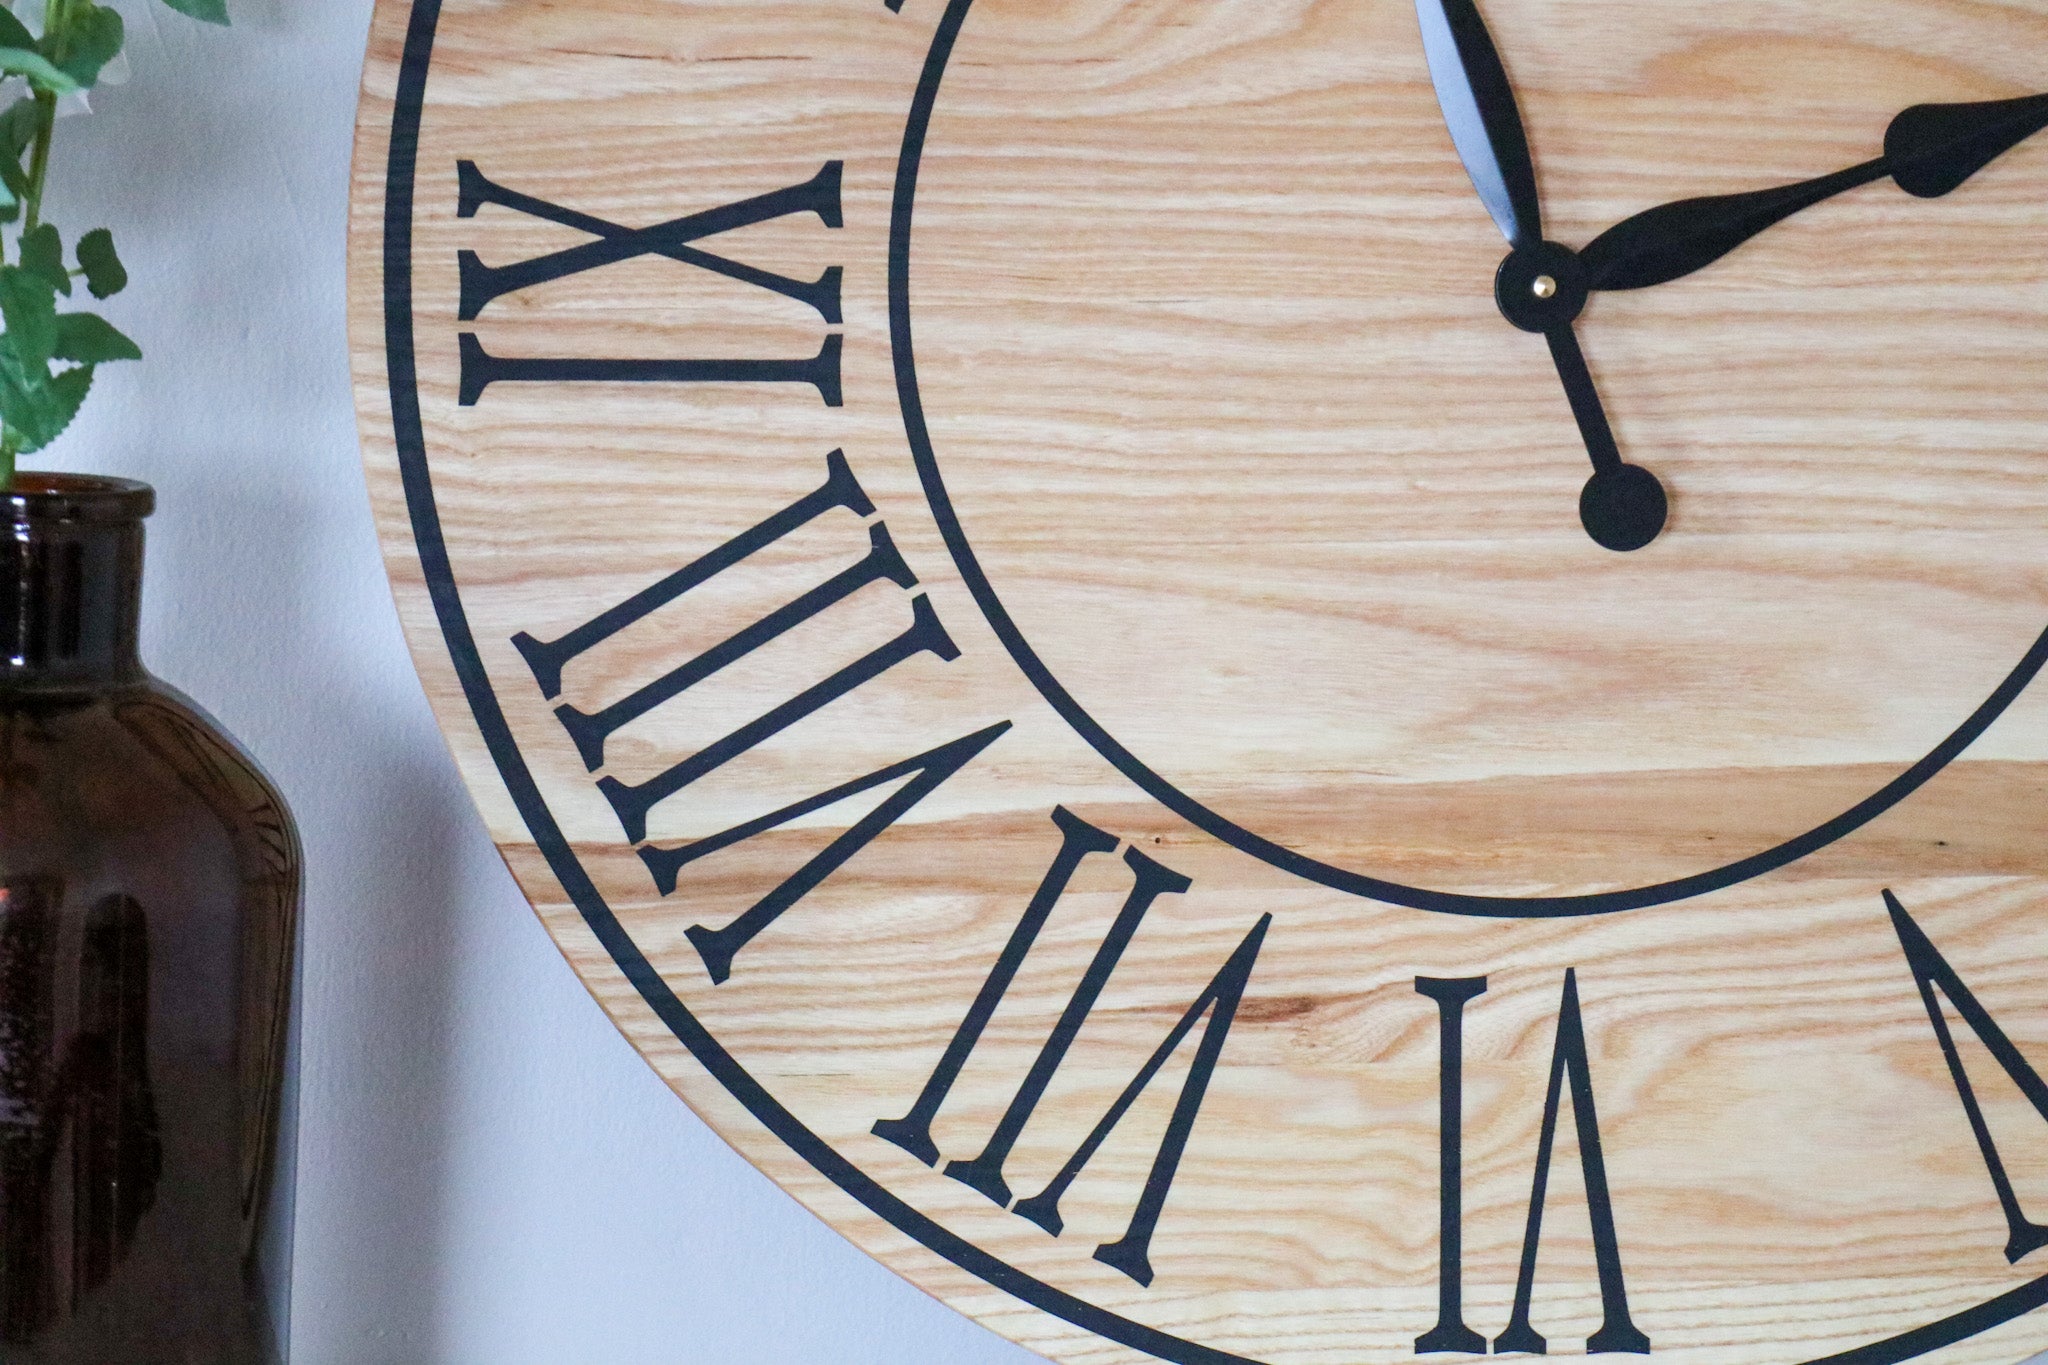 26&quot; Solid Ash Wood Wall Clock with Black Numbers and Lines (in stock) - Hazel Oak Farms